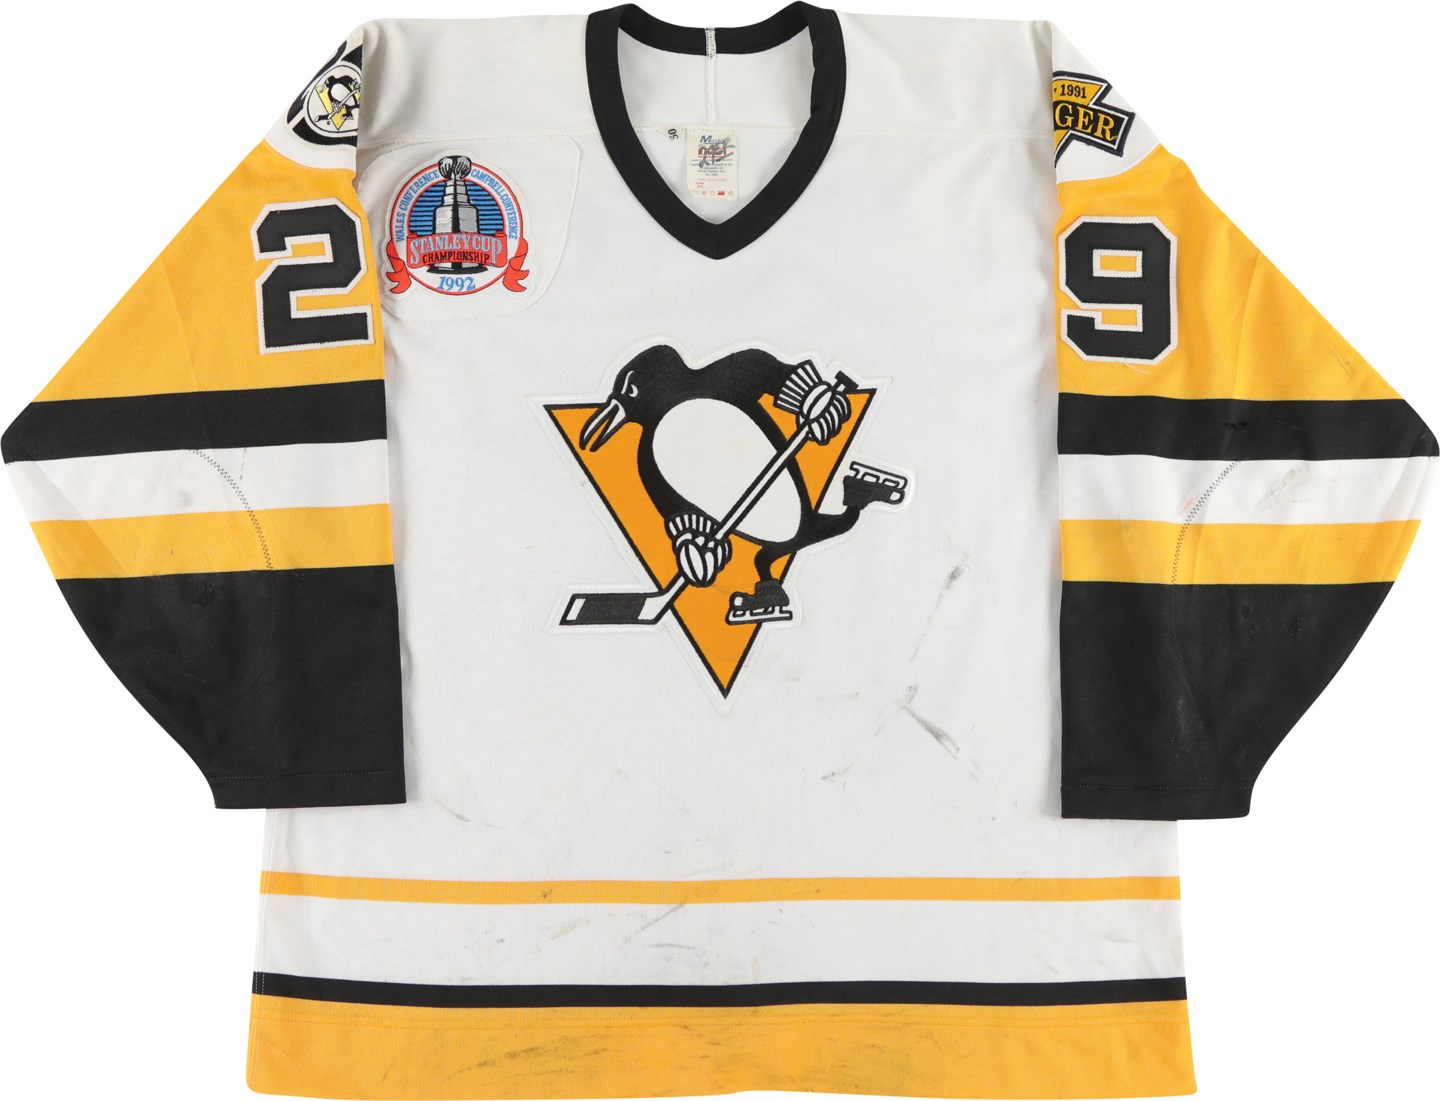 1992 Phil Bourque Stanley Cup Finals Game 1 Pittsburgh Penguins Game Worn Jersey - Bourque's Final Playoff Goal (Photo-Matched & Bourque LOA)